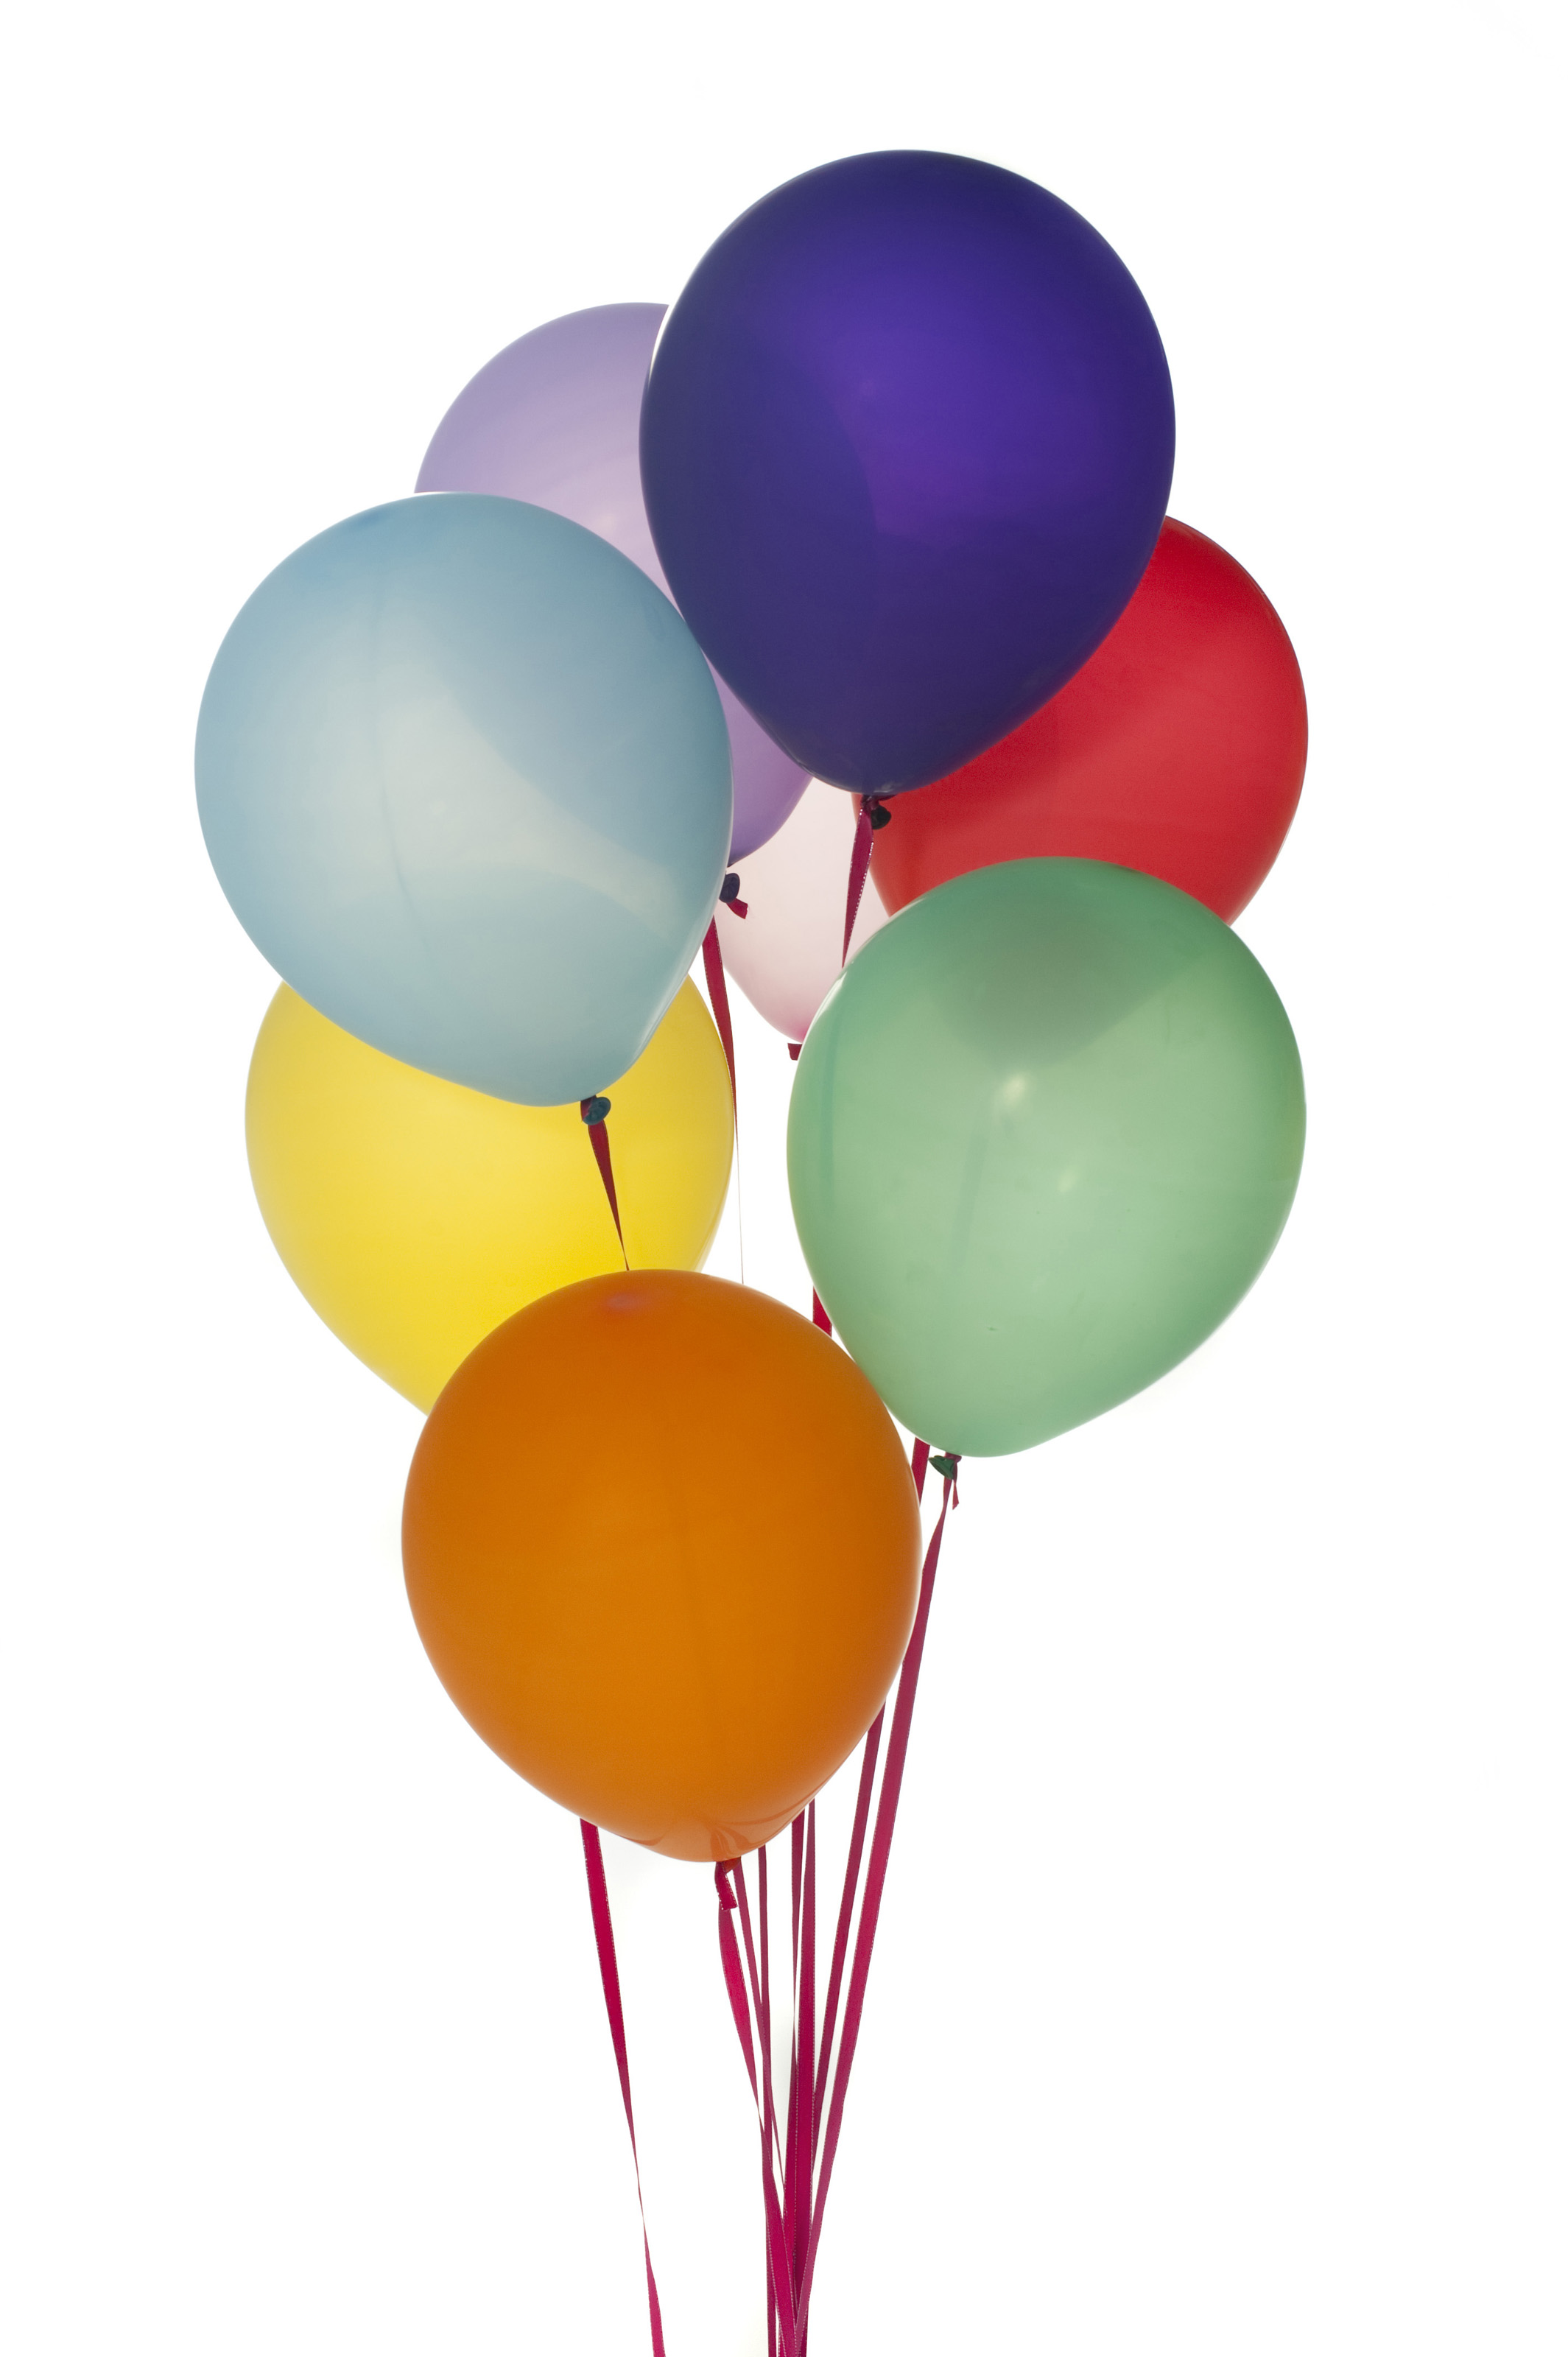 Free Stock Photo 10575 Bunch of colorful party balloons isolated on